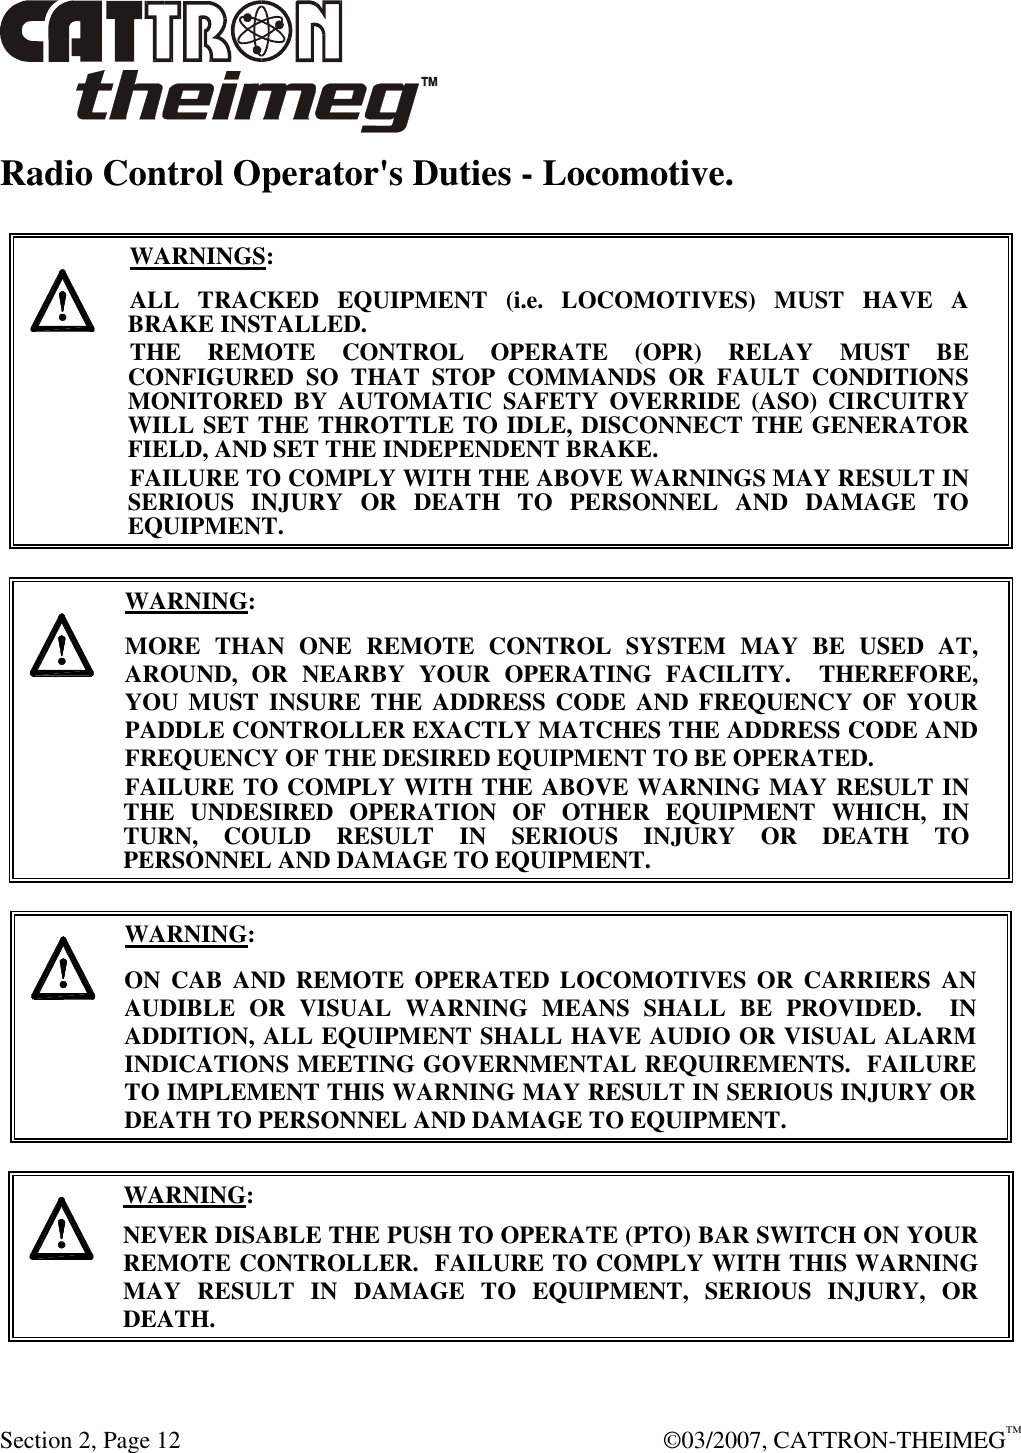  Section 2, Page 12    ©03/2007, CATTRON-THEIMEG™ Radio Control Operator&apos;s Duties - Locomotive.      WARNINGS: ALL  TRACKED  EQUIPMENT  (i.e.  LOCOMOTIVES)  MUST  HAVE  A BRAKE INSTALLED. THE  REMOTE  CONTROL  OPERATE  (OPR)  RELAY  MUST  BE CONFIGURED  SO  THAT  STOP  COMMANDS  OR  FAULT  CONDITIONS MONITORED  BY  AUTOMATIC  SAFETY  OVERRIDE  (ASO)  CIRCUITRY WILL SET THE THROTTLE TO IDLE, DISCONNECT THE GENERATOR FIELD, AND SET THE INDEPENDENT BRAKE.  FAILURE TO COMPLY WITH THE ABOVE WARNINGS MAY RESULT IN SERIOUS  INJURY  OR  DEATH  TO  PERSONNEL  AND  DAMAGE  TO EQUIPMENT.       WARNING: MORE  THAN  ONE  REMOTE  CONTROL  SYSTEM  MAY  BE  USED  AT, AROUND,  OR  NEARBY  YOUR  OPERATING  FACILITY.    THEREFORE, YOU MUST INSURE THE ADDRESS CODE AND FREQUENCY OF YOUR PADDLE CONTROLLER EXACTLY MATCHES THE ADDRESS CODE AND FREQUENCY OF THE DESIRED EQUIPMENT TO BE OPERATED. FAILURE TO COMPLY WITH THE ABOVE WARNING MAY RESULT IN THE  UNDESIRED  OPERATION  OF  OTHER  EQUIPMENT  WHICH,  IN TURN,  COULD  RESULT  IN  SERIOUS  INJURY  OR  DEATH  TO PERSONNEL AND DAMAGE TO EQUIPMENT.       WARNING: ON  CAB  AND  REMOTE  OPERATED  LOCOMOTIVES  OR  CARRIERS  AN AUDIBLE  OR  VISUAL  WARNING  MEANS  SHALL  BE  PROVIDED.    IN ADDITION, ALL EQUIPMENT SHALL HAVE AUDIO OR VISUAL ALARM INDICATIONS MEETING GOVERNMENTAL REQUIREMENTS.  FAILURE TO IMPLEMENT THIS WARNING MAY RESULT IN SERIOUS INJURY OR DEATH TO PERSONNEL AND DAMAGE TO EQUIPMENT.     WARNING: NEVER DISABLE THE PUSH TO OPERATE (PTO) BAR SWITCH ON YOUR REMOTE CONTROLLER.  FAILURE TO COMPLY WITH THIS WARNING MAY  RESULT  IN  DAMAGE  TO  EQUIPMENT,  SERIOUS  INJURY,  OR DEATH.    